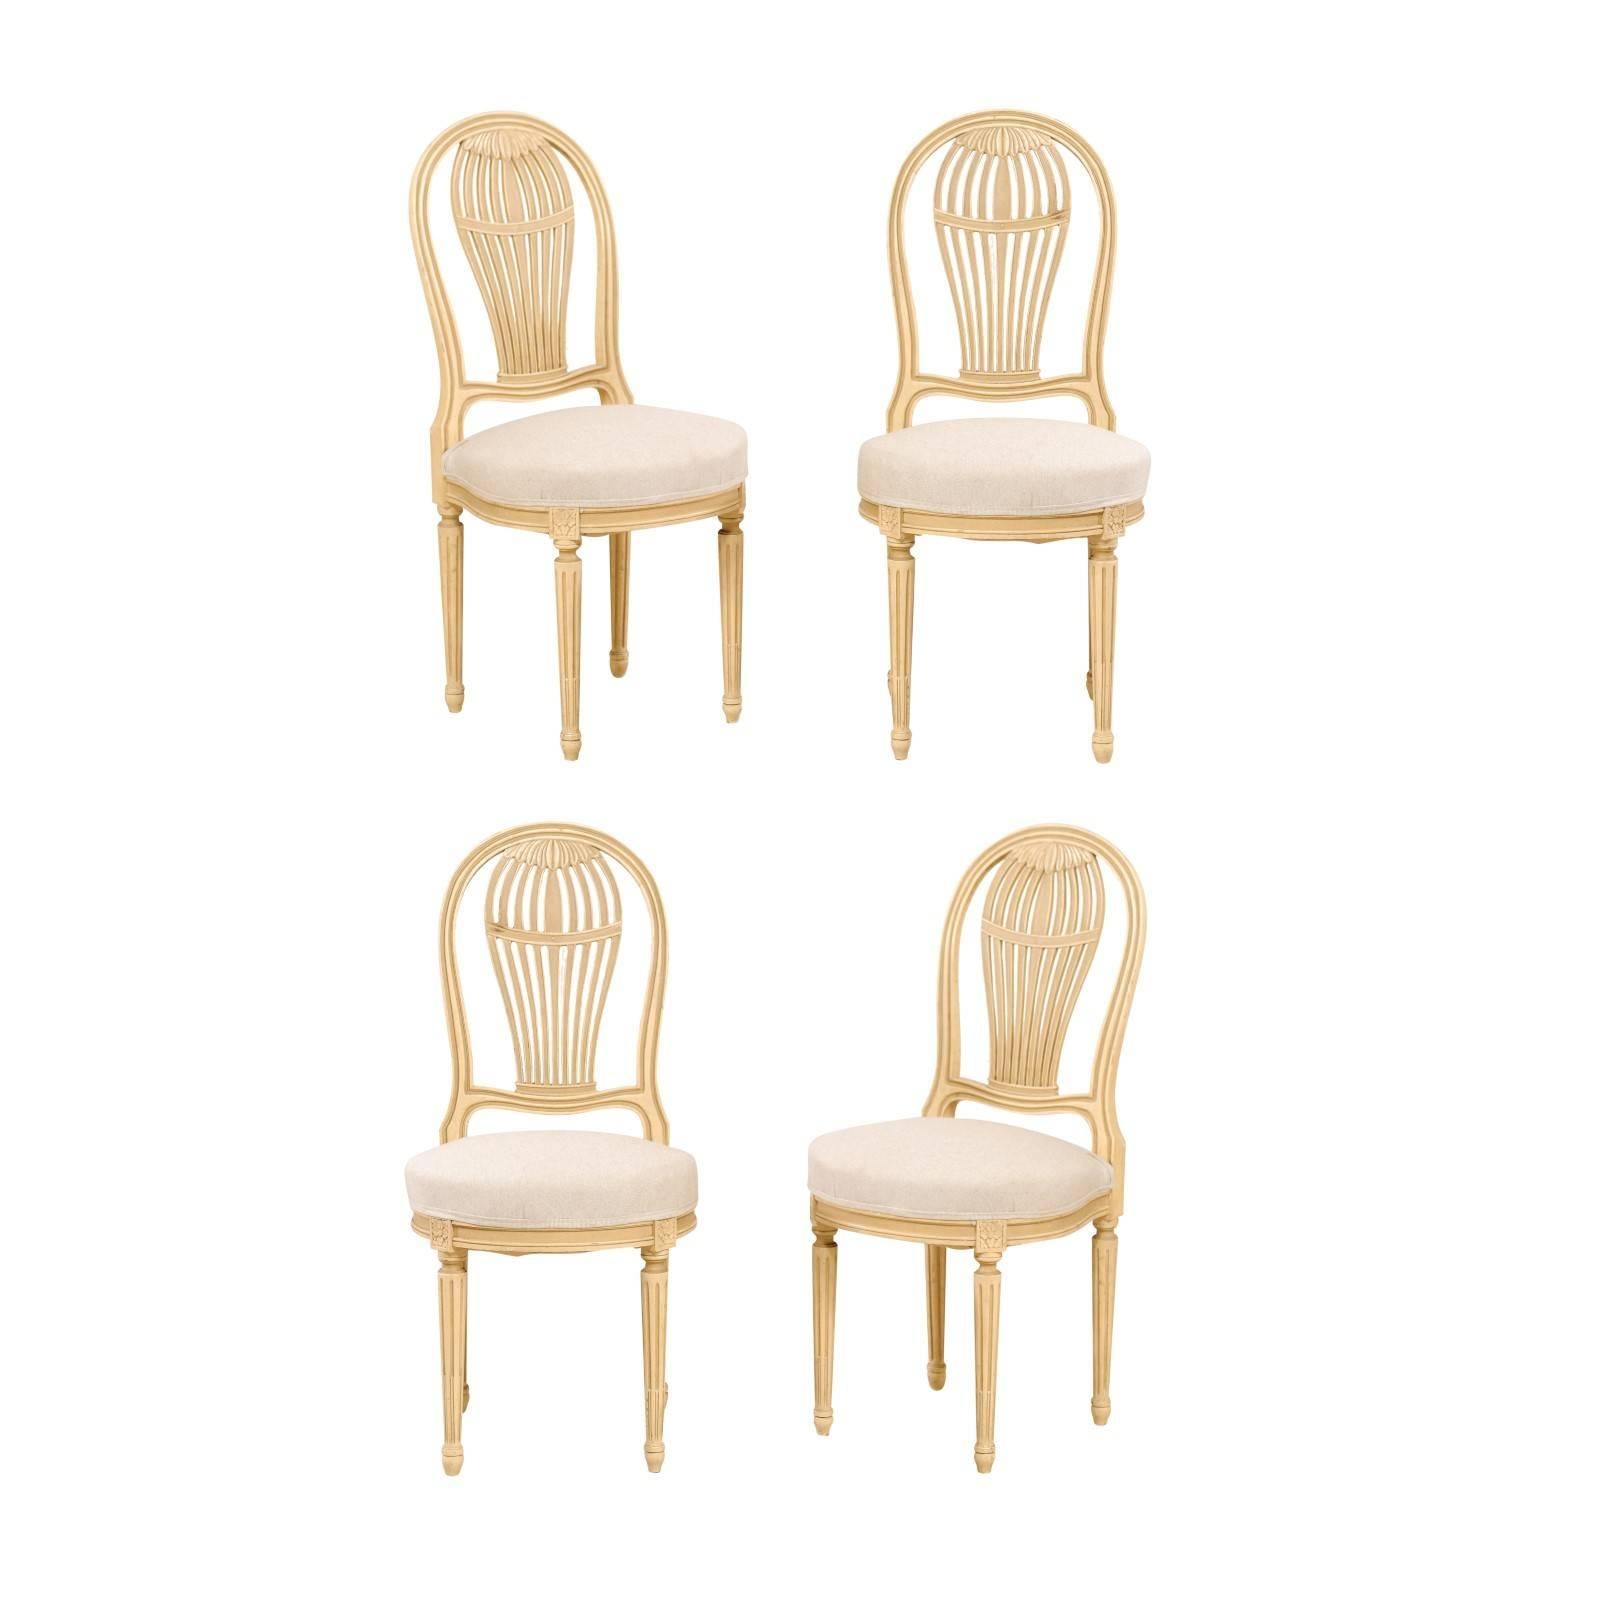 Set of Four French Louis XVI Style Painted Wood Balloon-Back Chairs